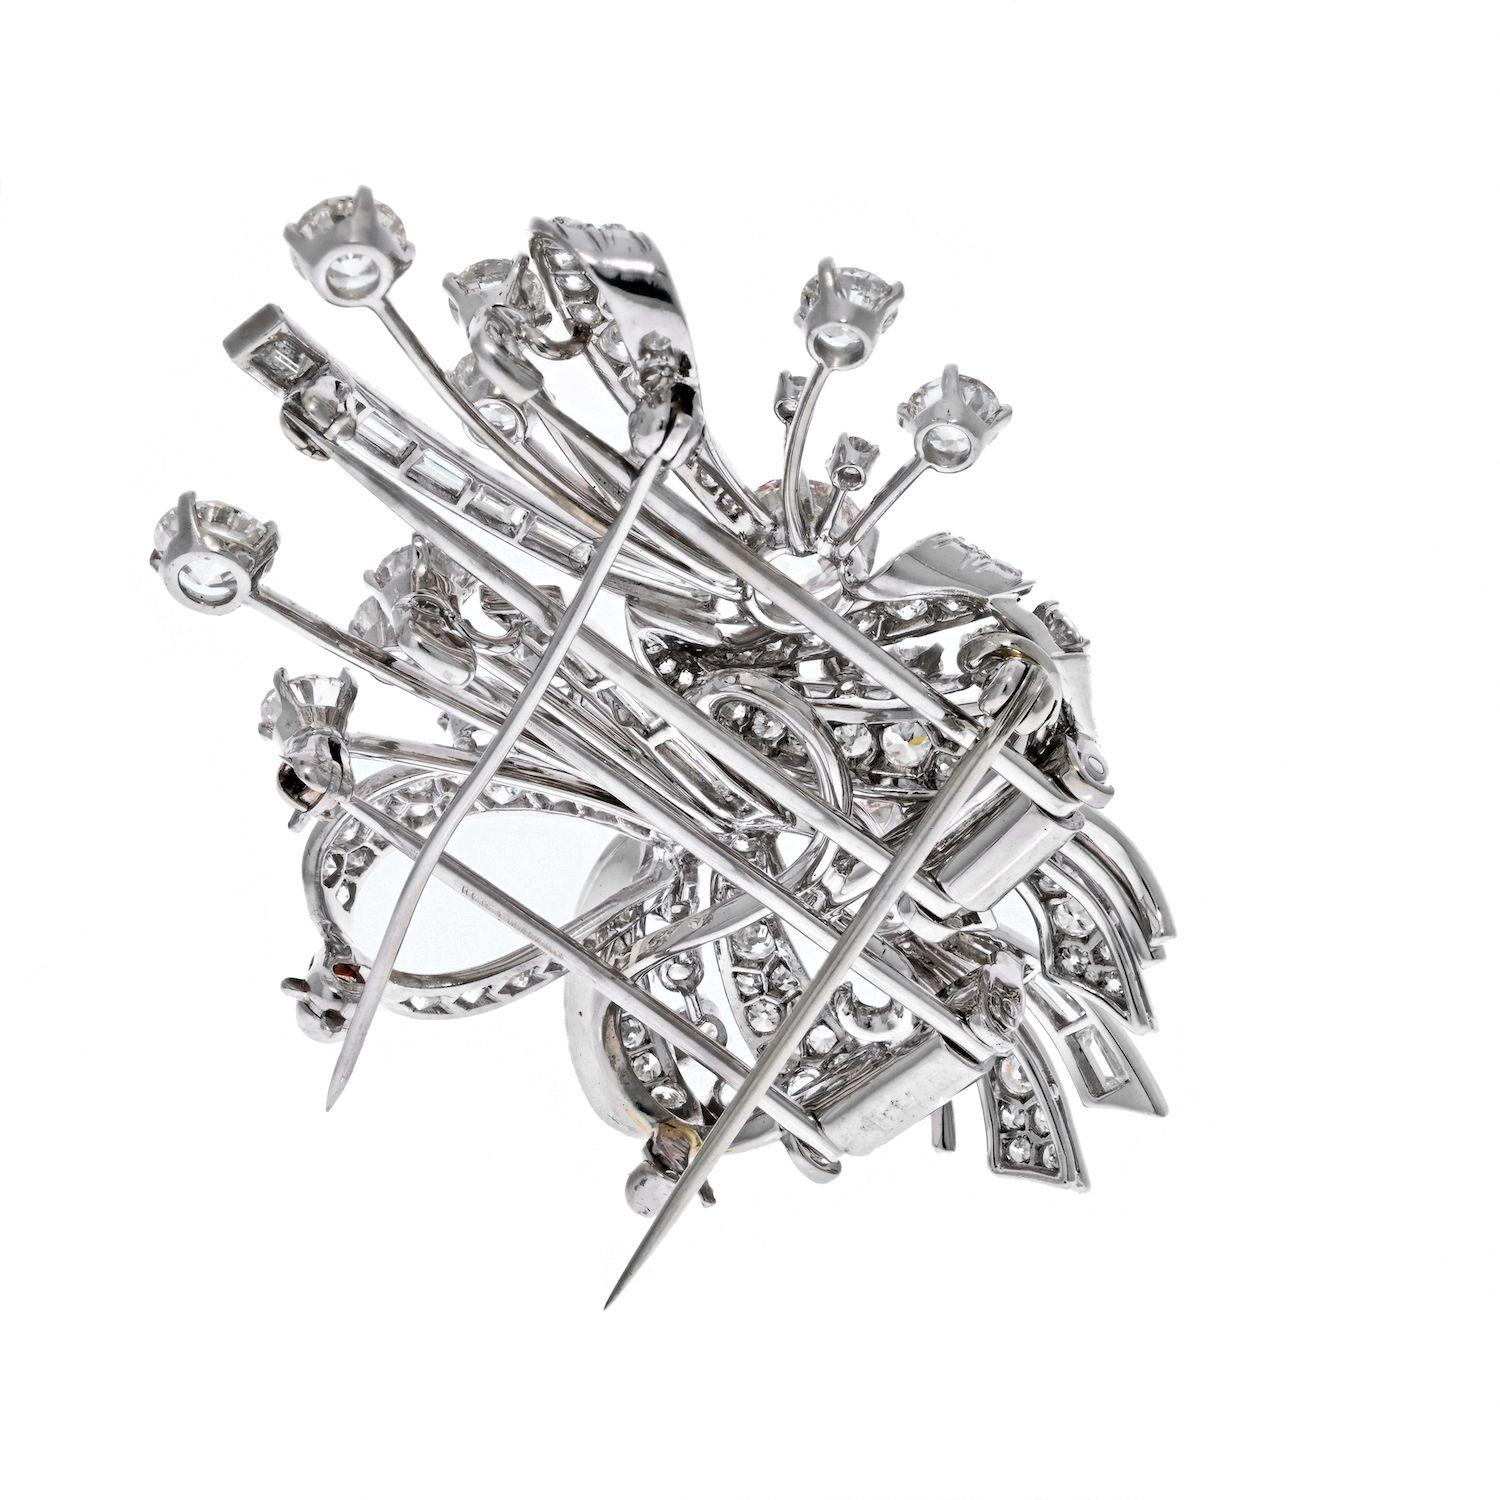 We love diamond brooches and collected quite a few of them, so we know when we tell you that this one is a beauty! Made in Platinum with lots of high quality diamonds of an amazing sparkle and shine. A beautiful period piece from 1950's this